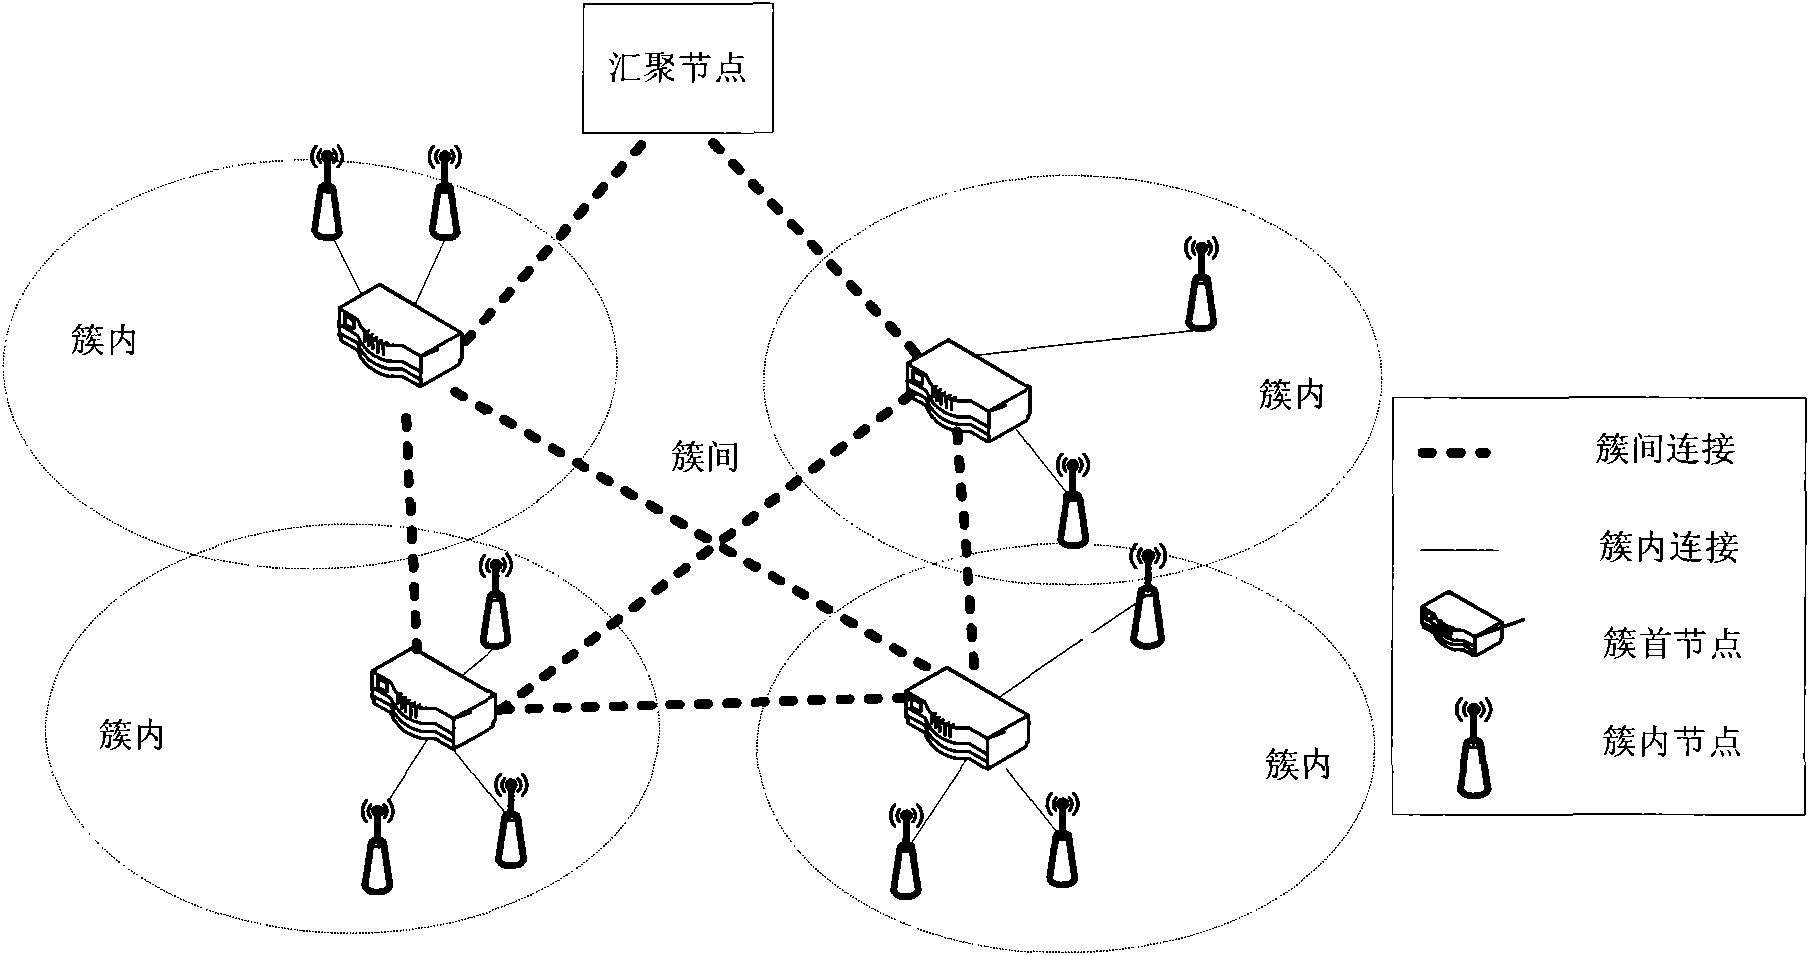 Clustering-wireless-sensor-network-orientated two-stage adaptive frequency-hopping method